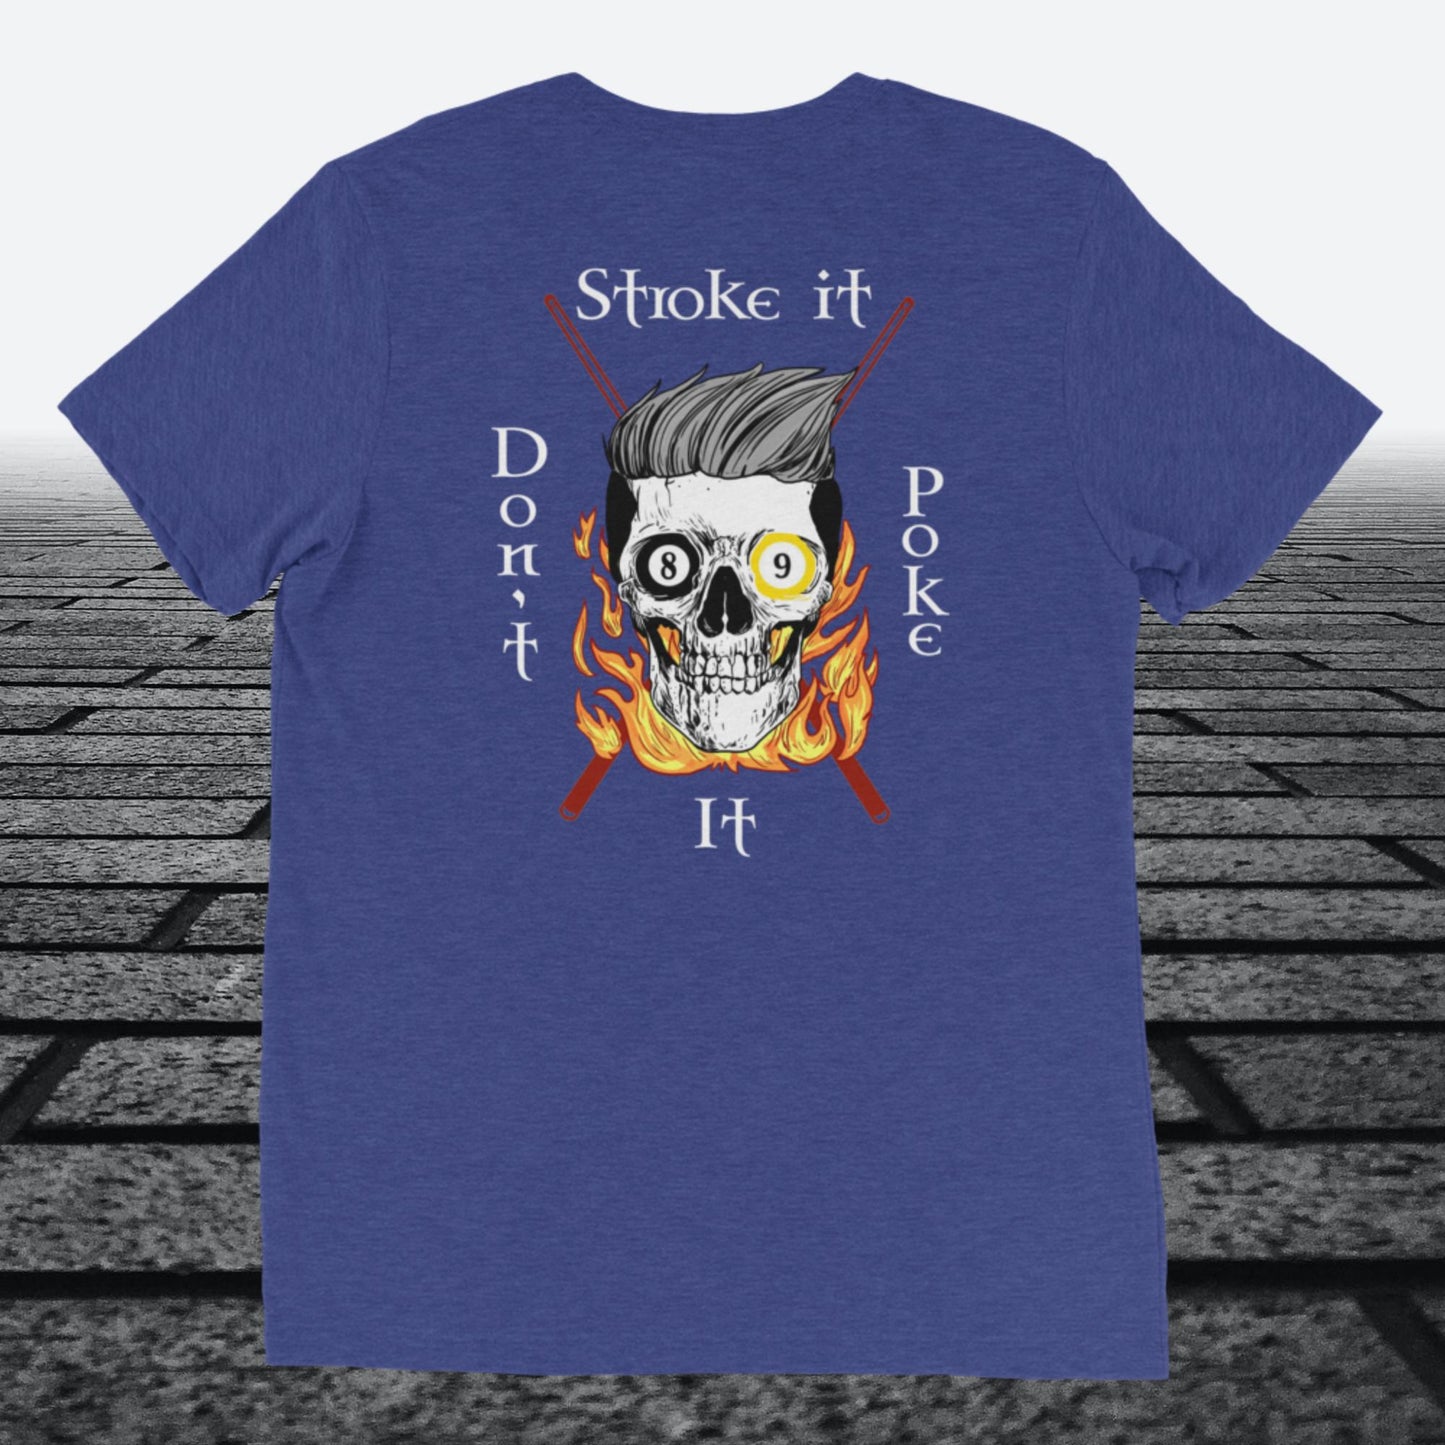 Stroke it Don't Poke it, with logo on front,  tri-blend t-shirt